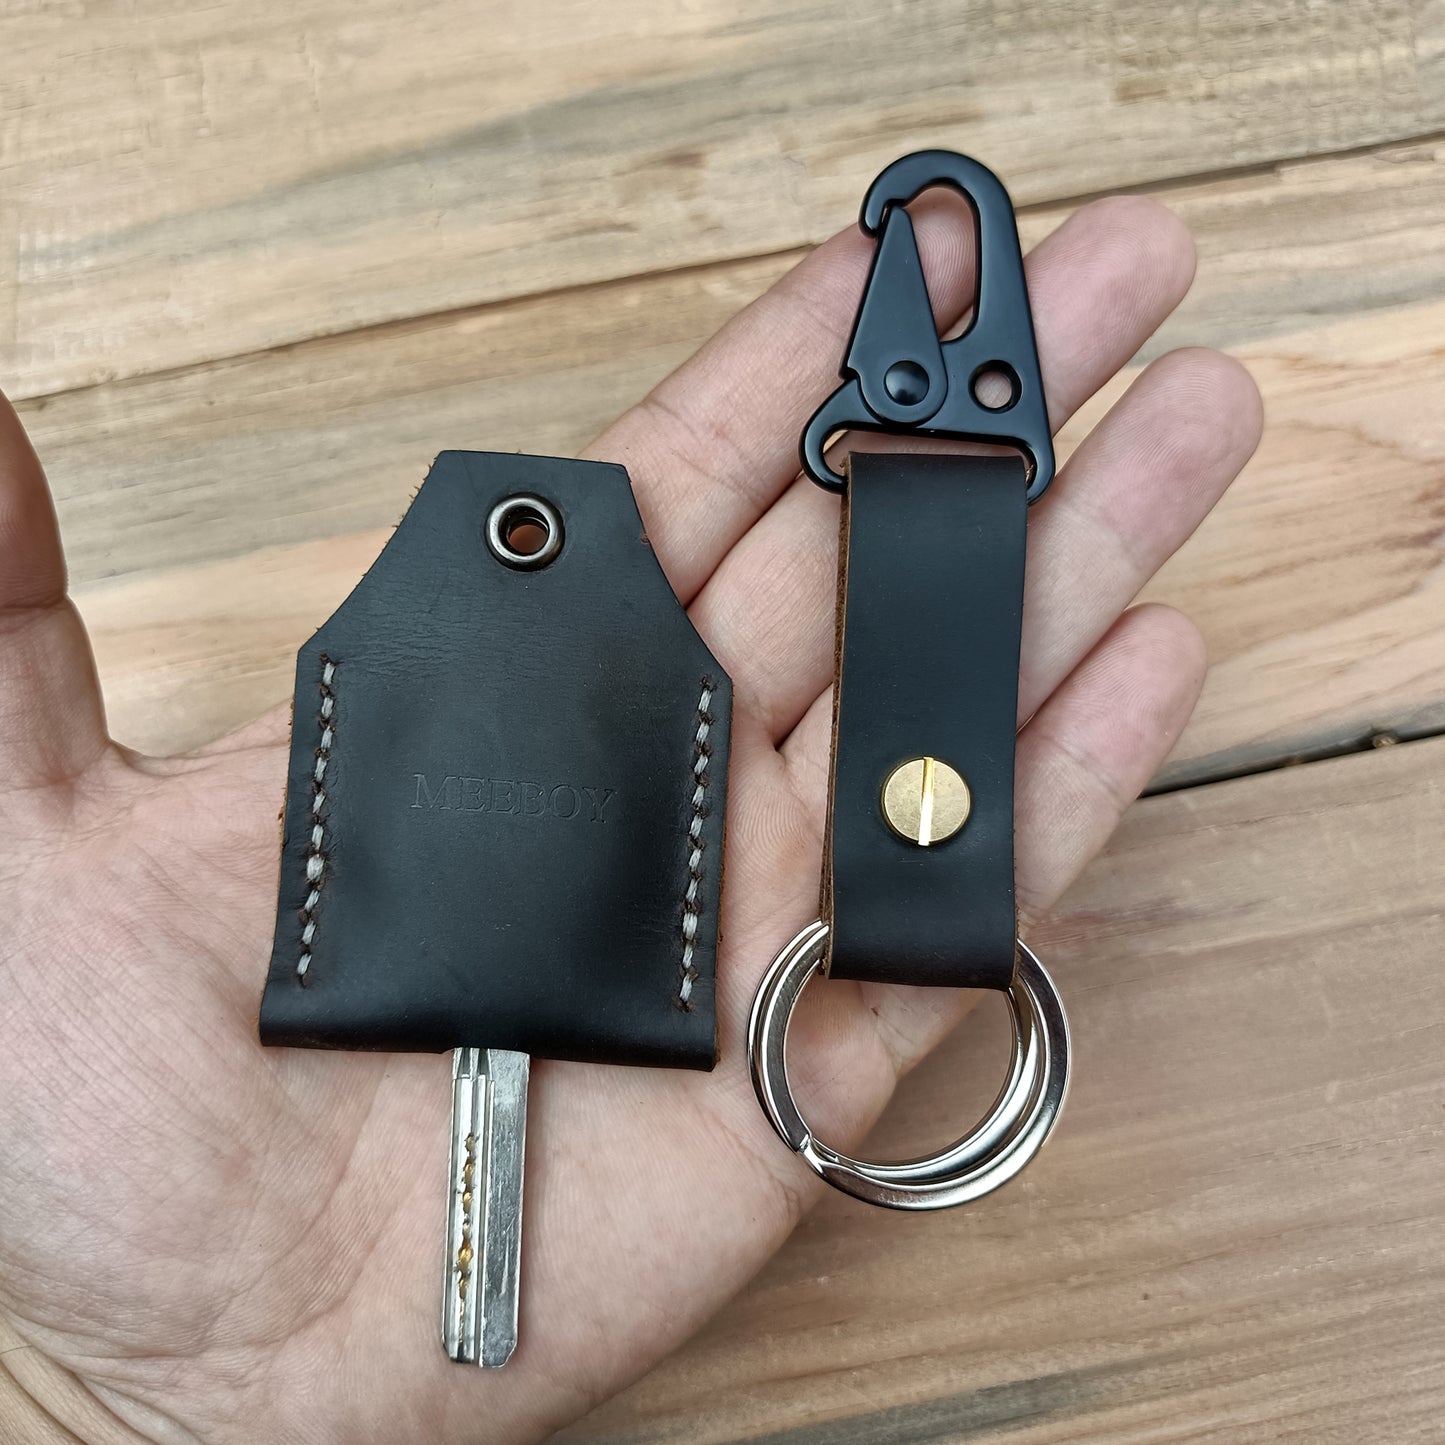 handmade Keychain leather Protective Key Case Cover for Key Control Dust Cap Holder Gift Women Key protector